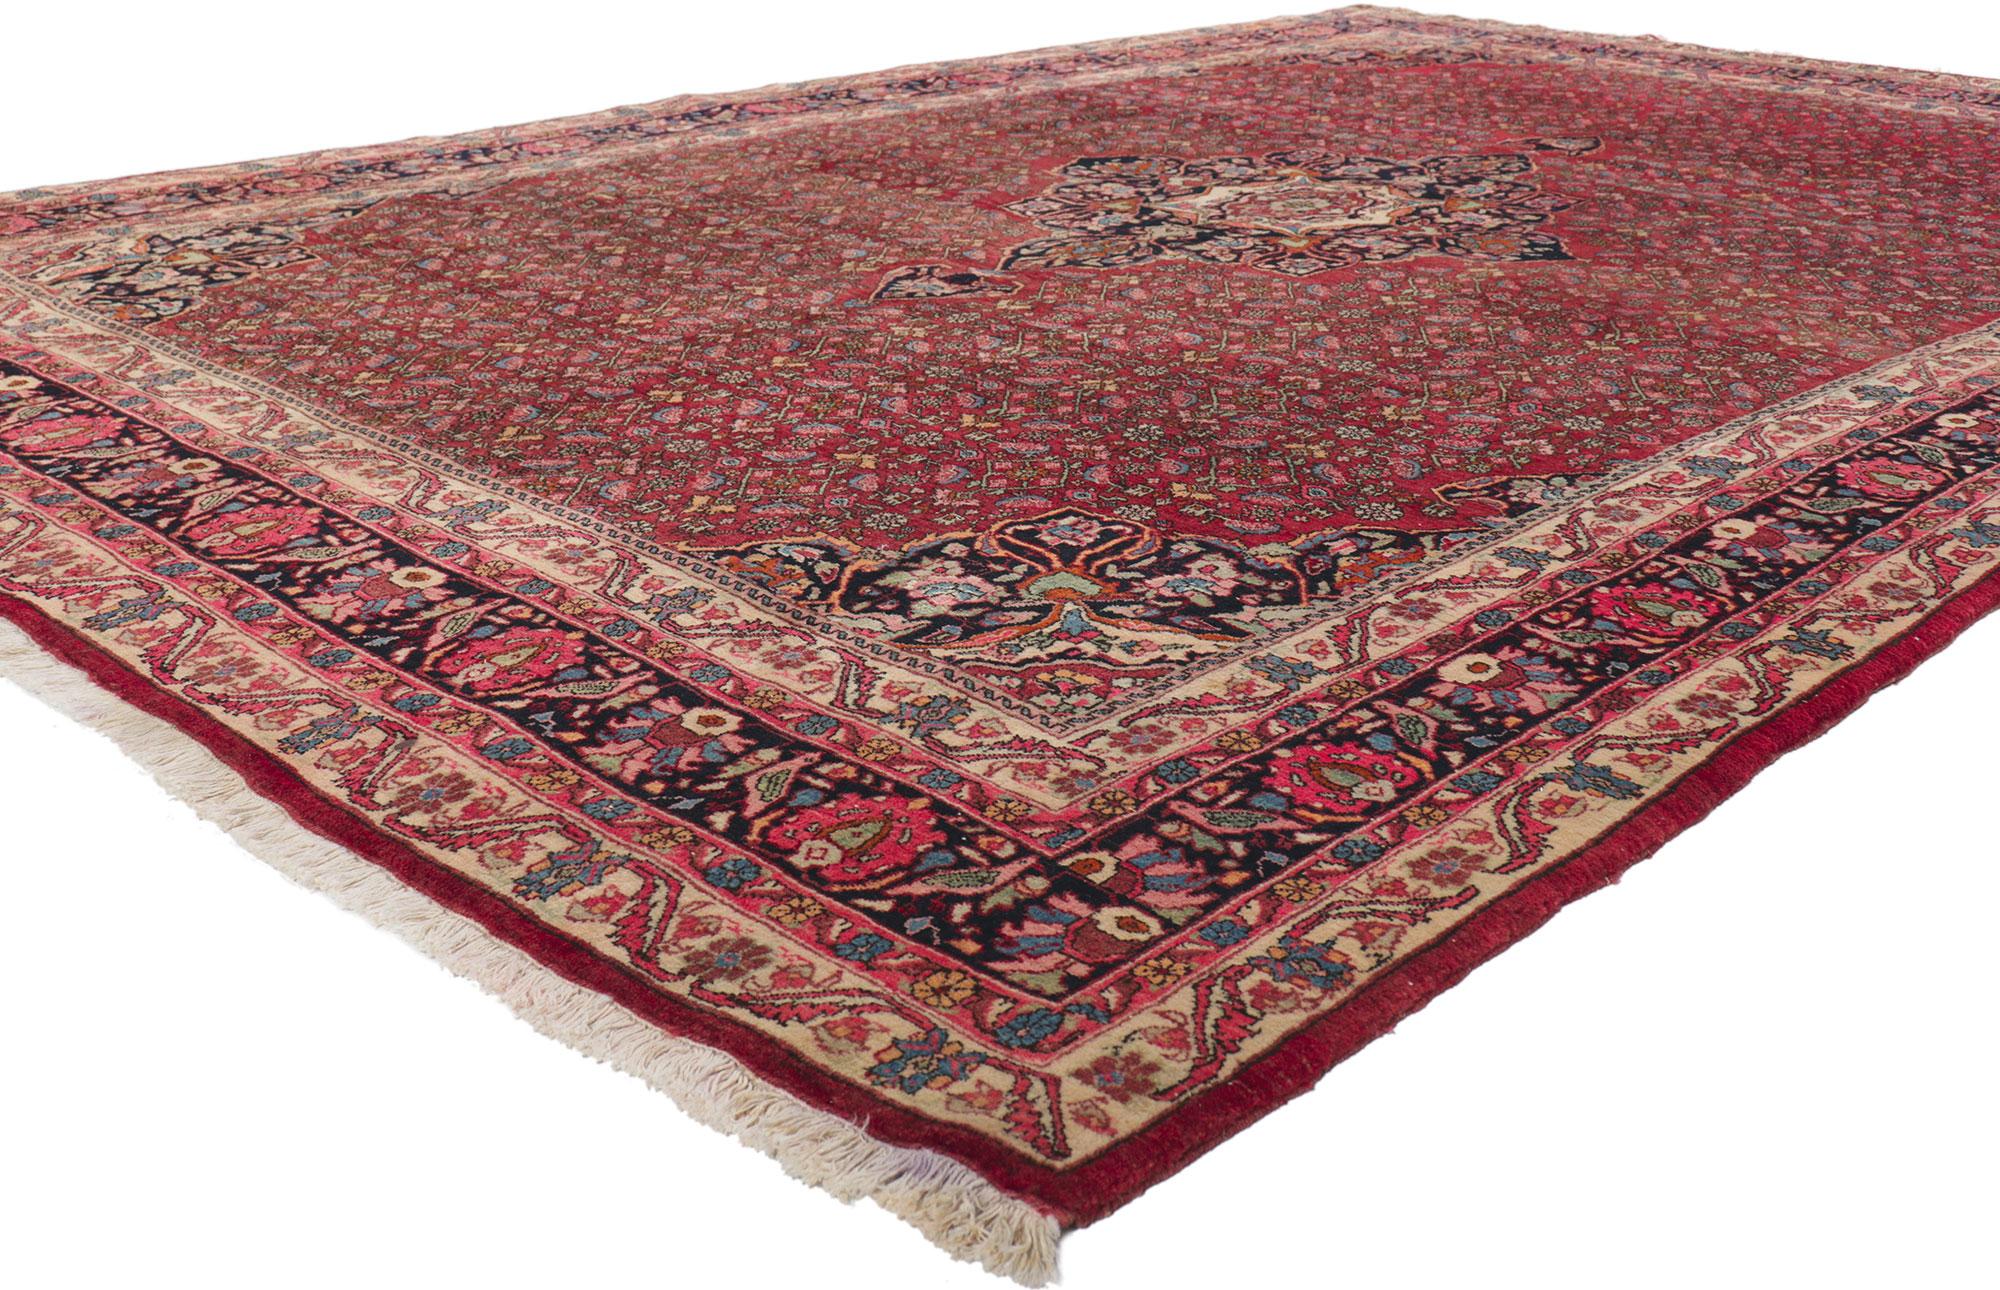 61184 Antique Persian Bijar rug, 07'05 x 11'00.
?With its timeless style, incredible detail and texture, this hand-knotted wool antique Persian Bijar rug is poised to impress. The eye-catching Herati design and traditional color palette woven into